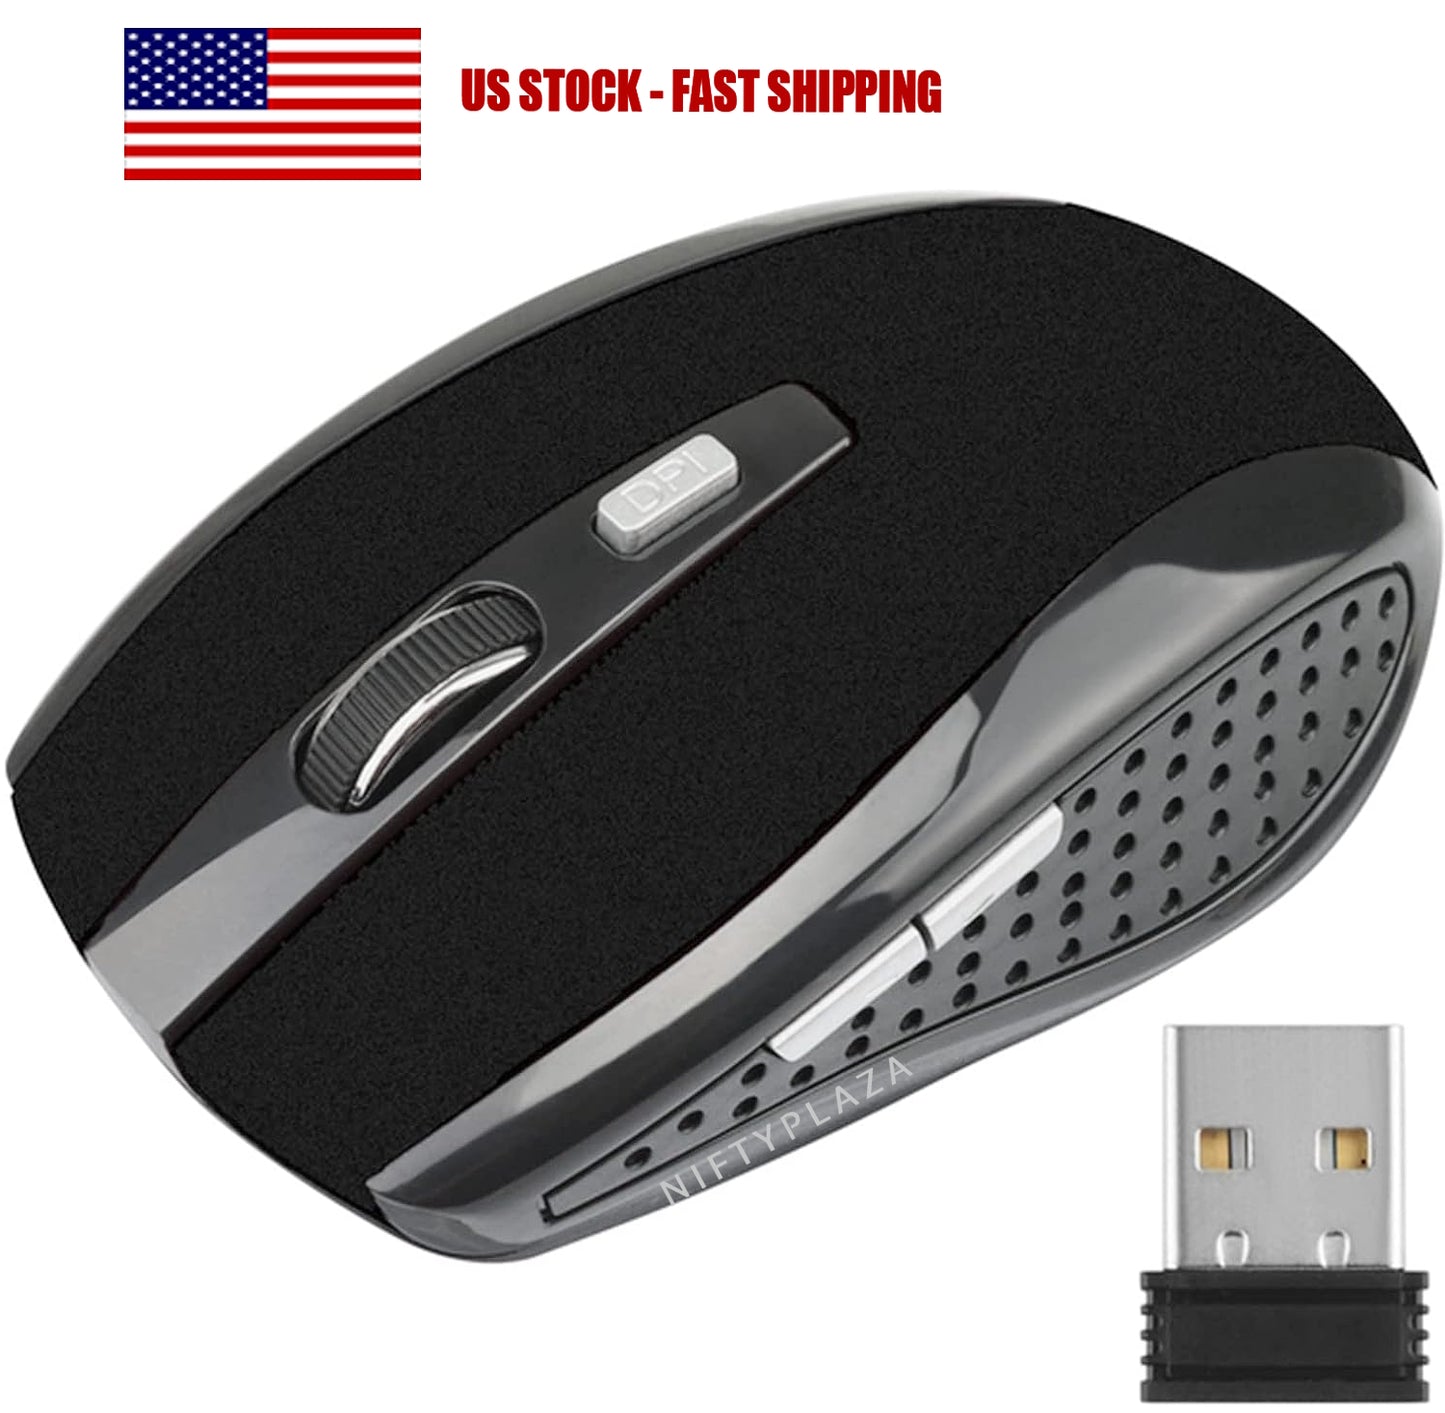 Wireless Optical Dual Mode Gaming Mouse 2.4GHz 1600DPI USB Receiver Mice PC Laptop